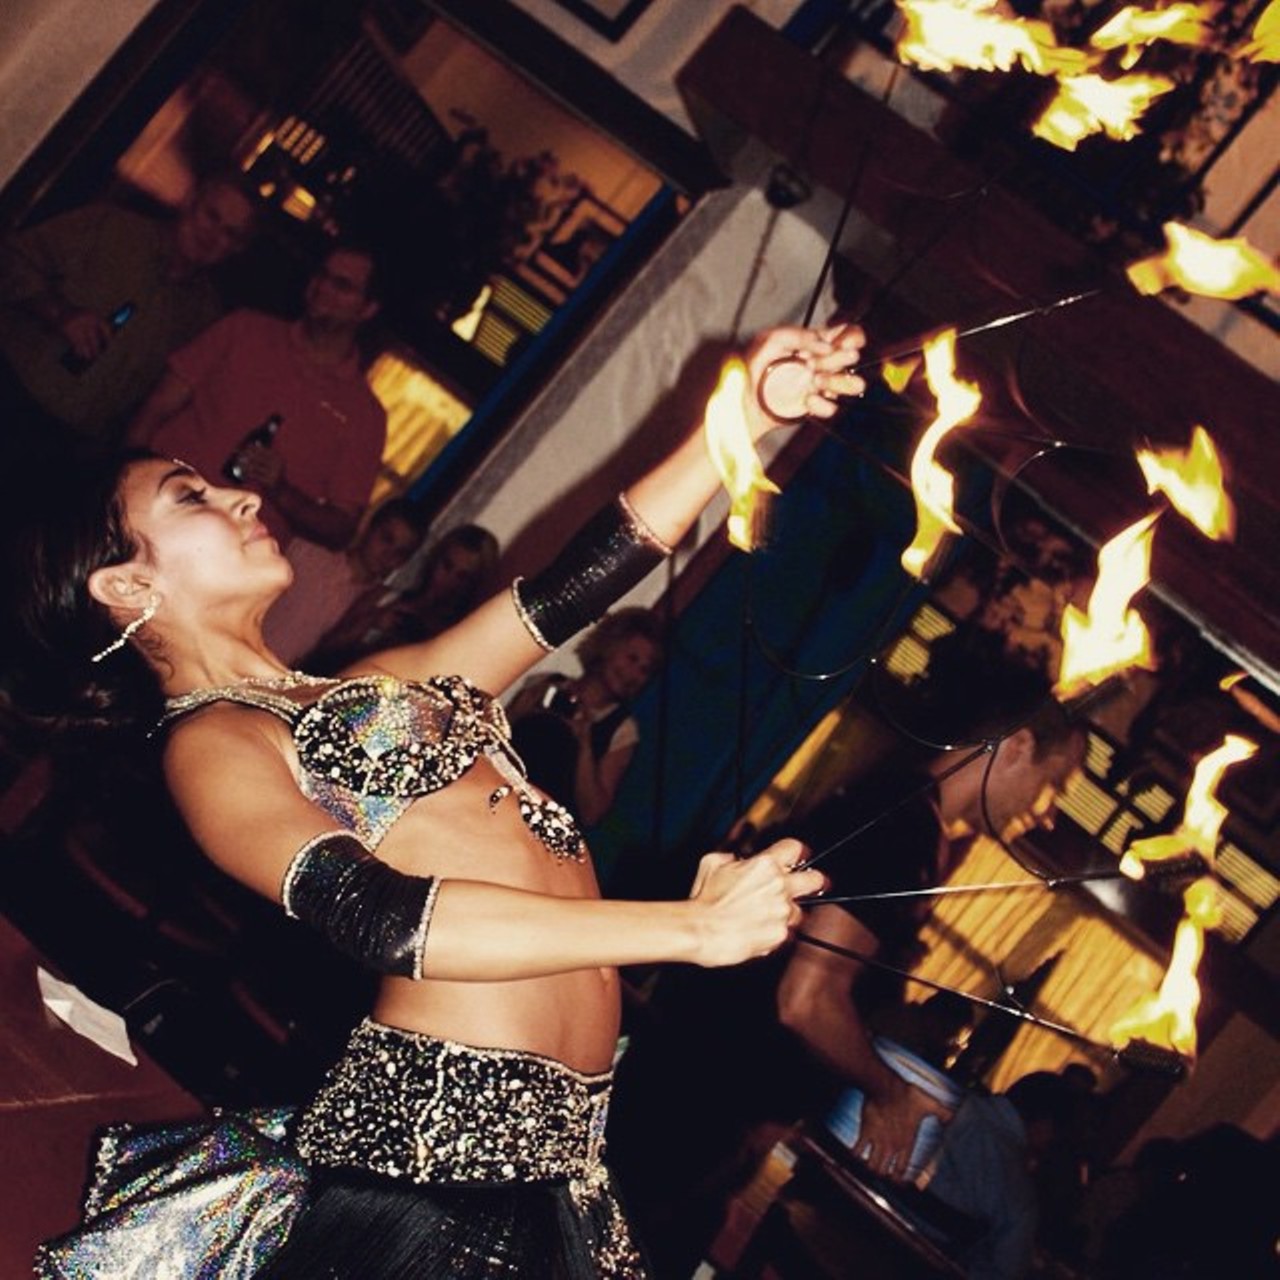 Taverna Opa
9101 International Drive | 407-351-8660
Patrons jump up on the tables for a belly dance fest while waiters bring the heat with flaming Greek cheese. But Taverna Opa doesn&#146;t offer up the most authentic Greek experience in Orlando with just their dancing &#150; the hummus is off the chain here.
Photo via tavernaopaorl/Instagram